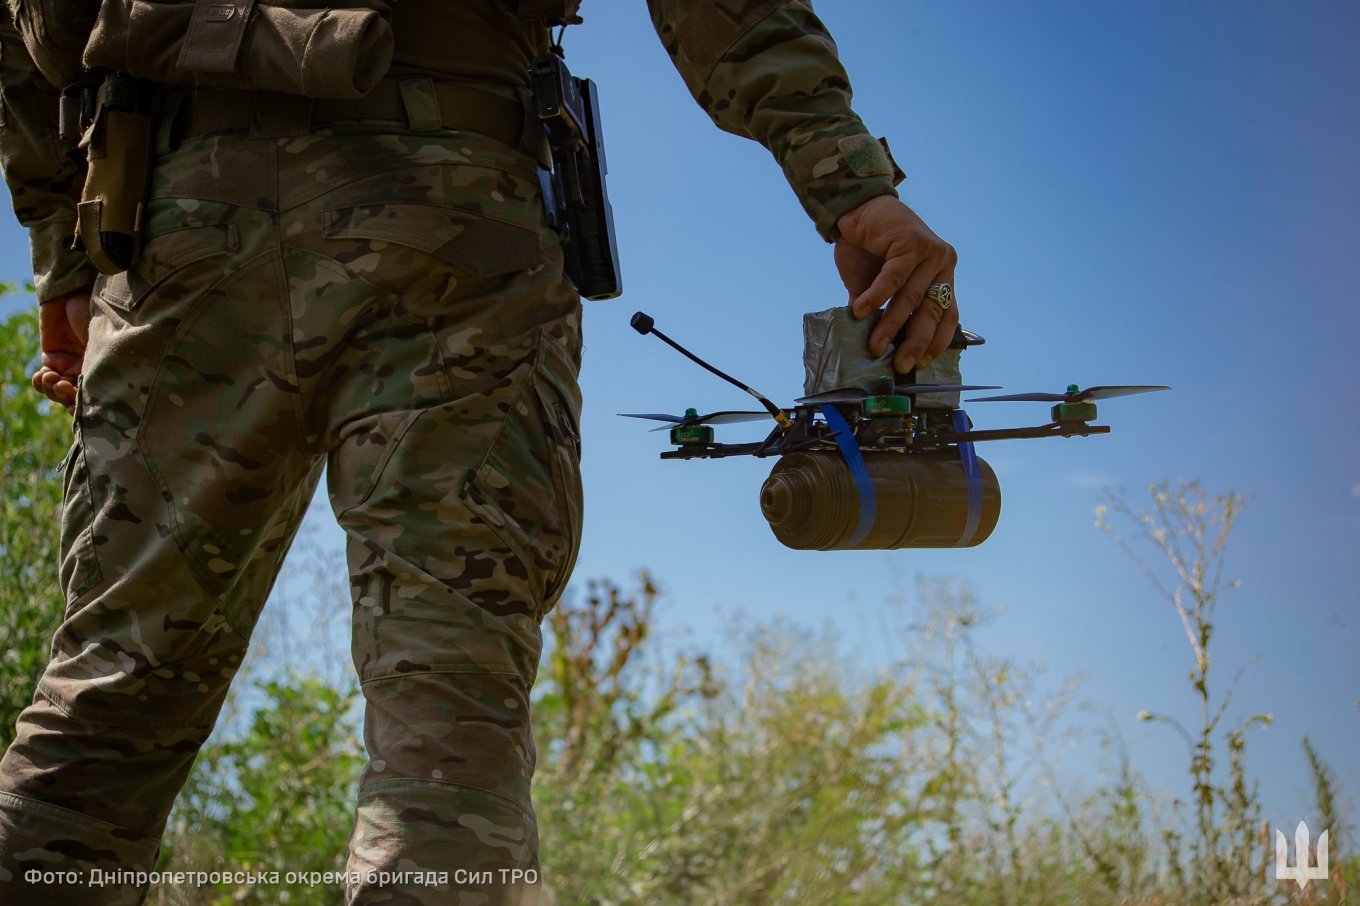 Ukrainian soldier holding an FPV drone